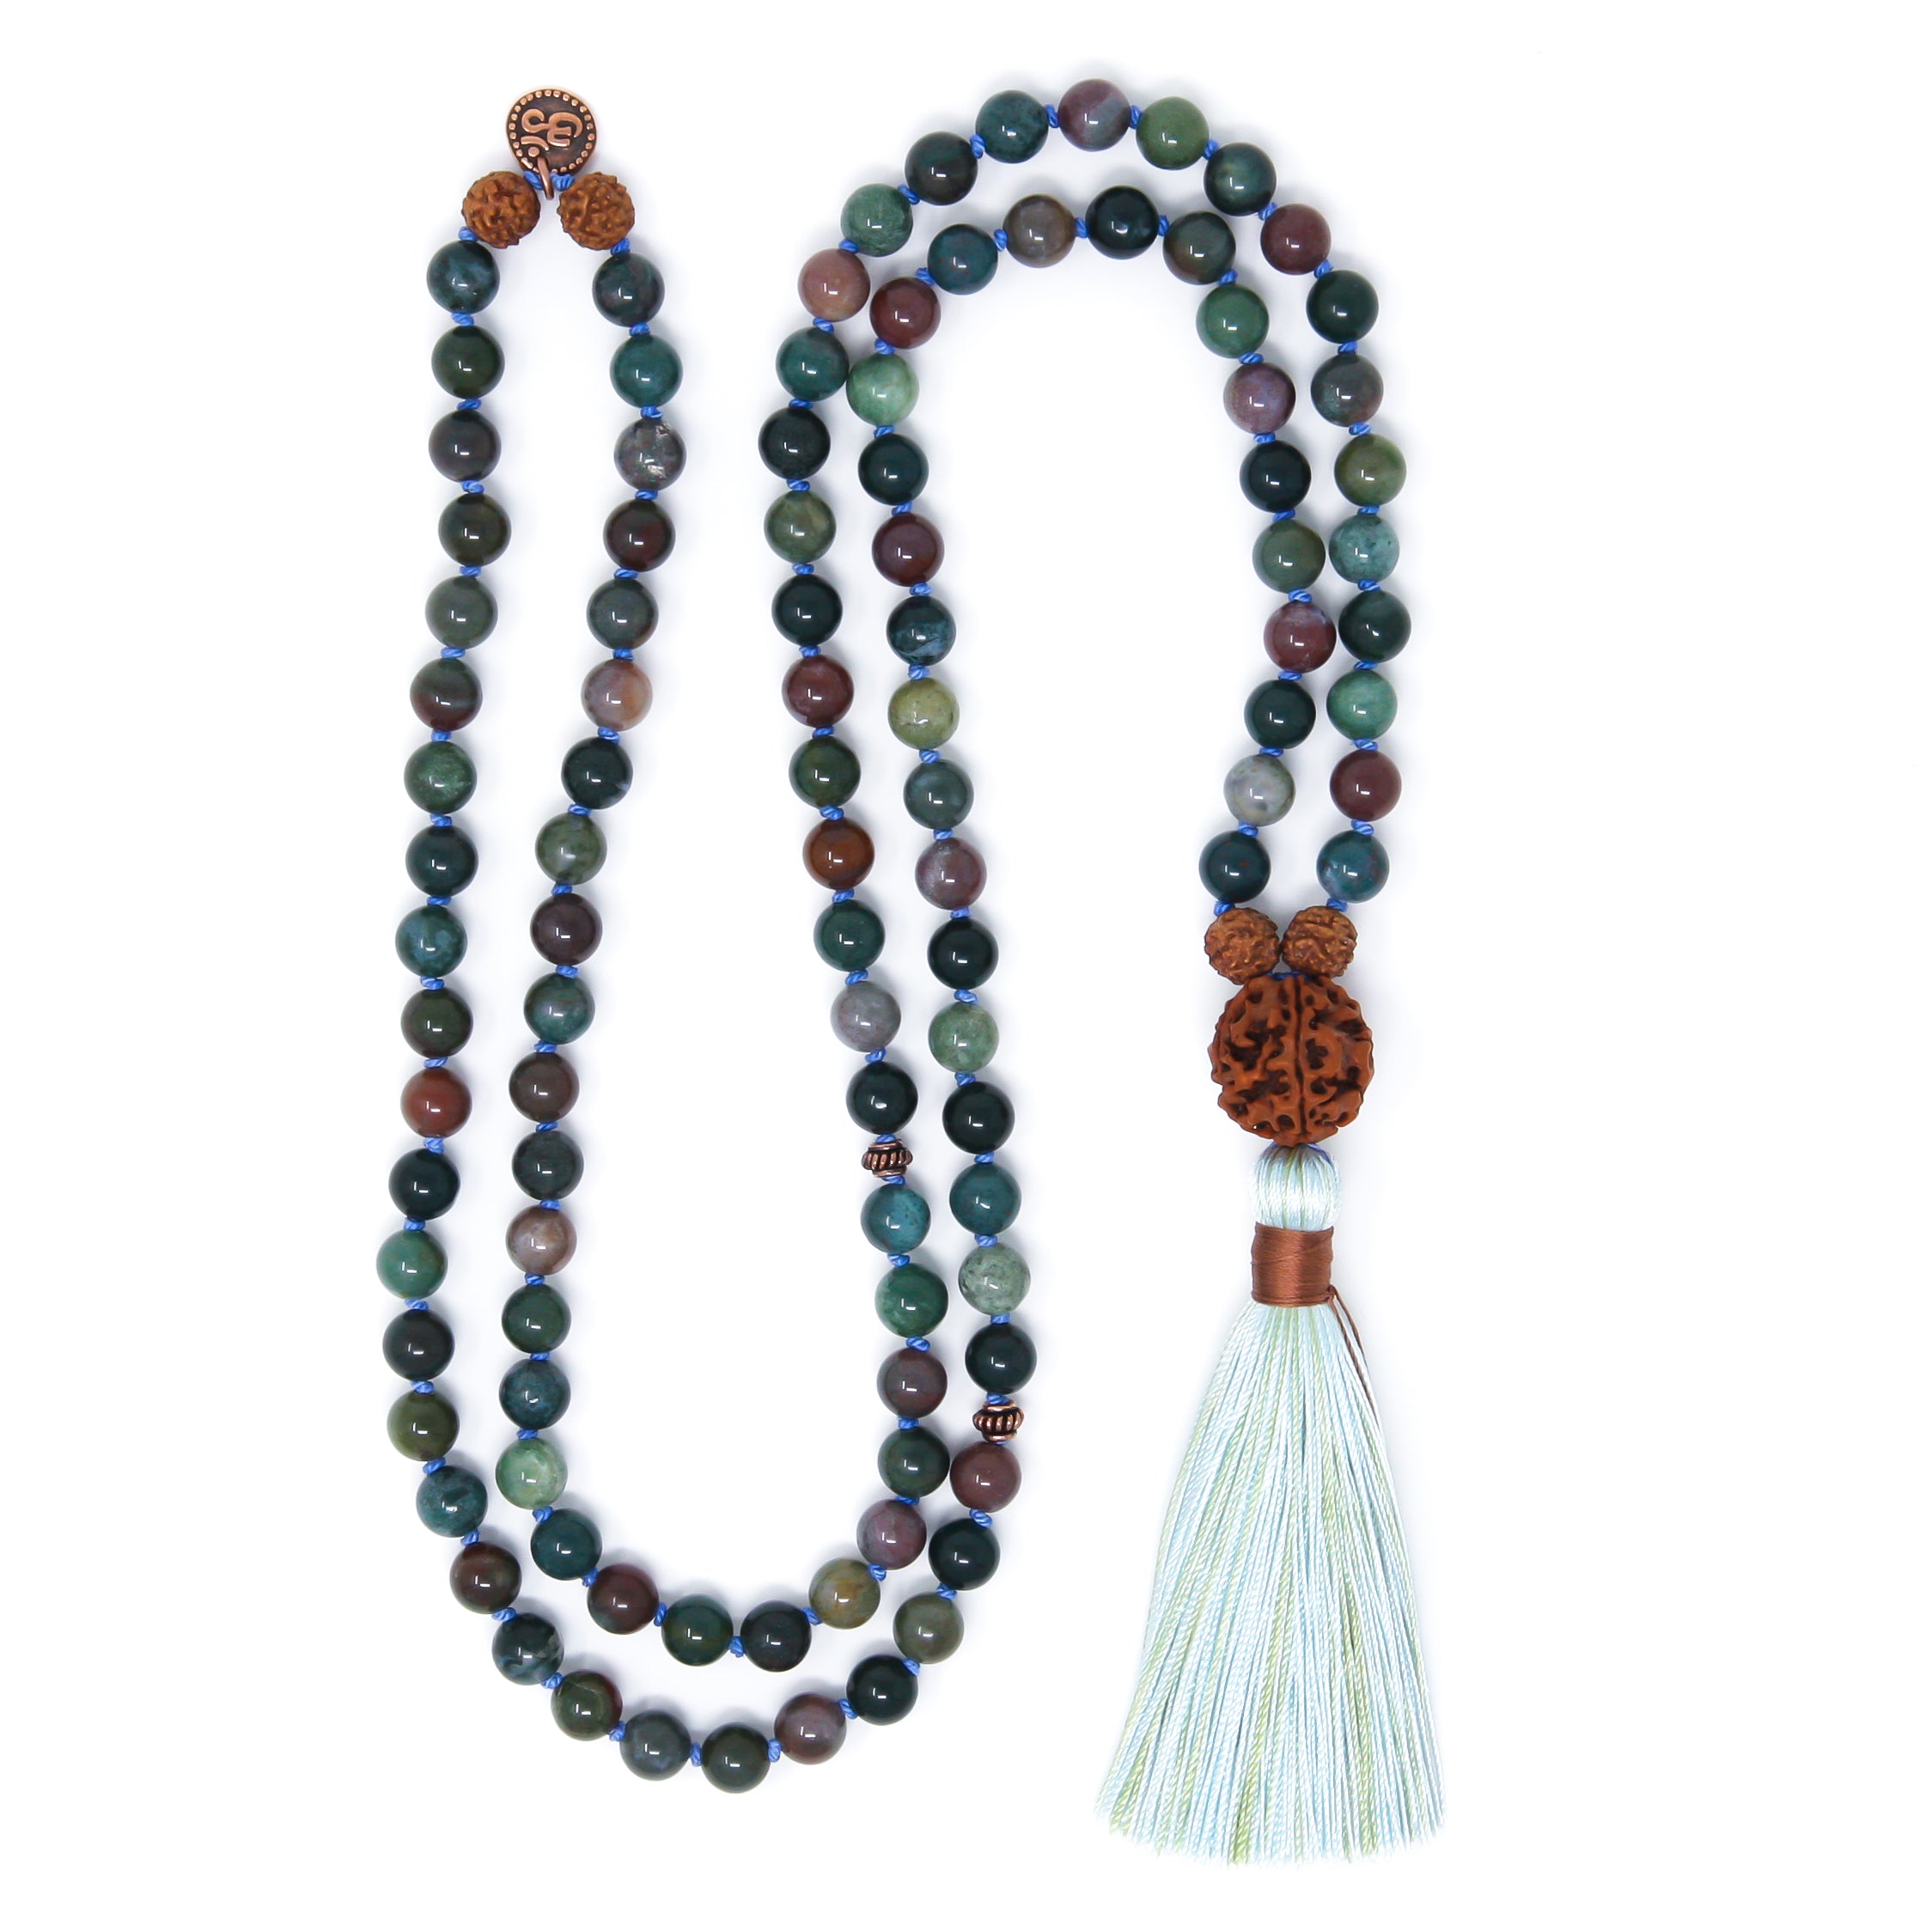 Indian Agate Mala Necklace with Rudraksha and Om charm, yoga jewelry